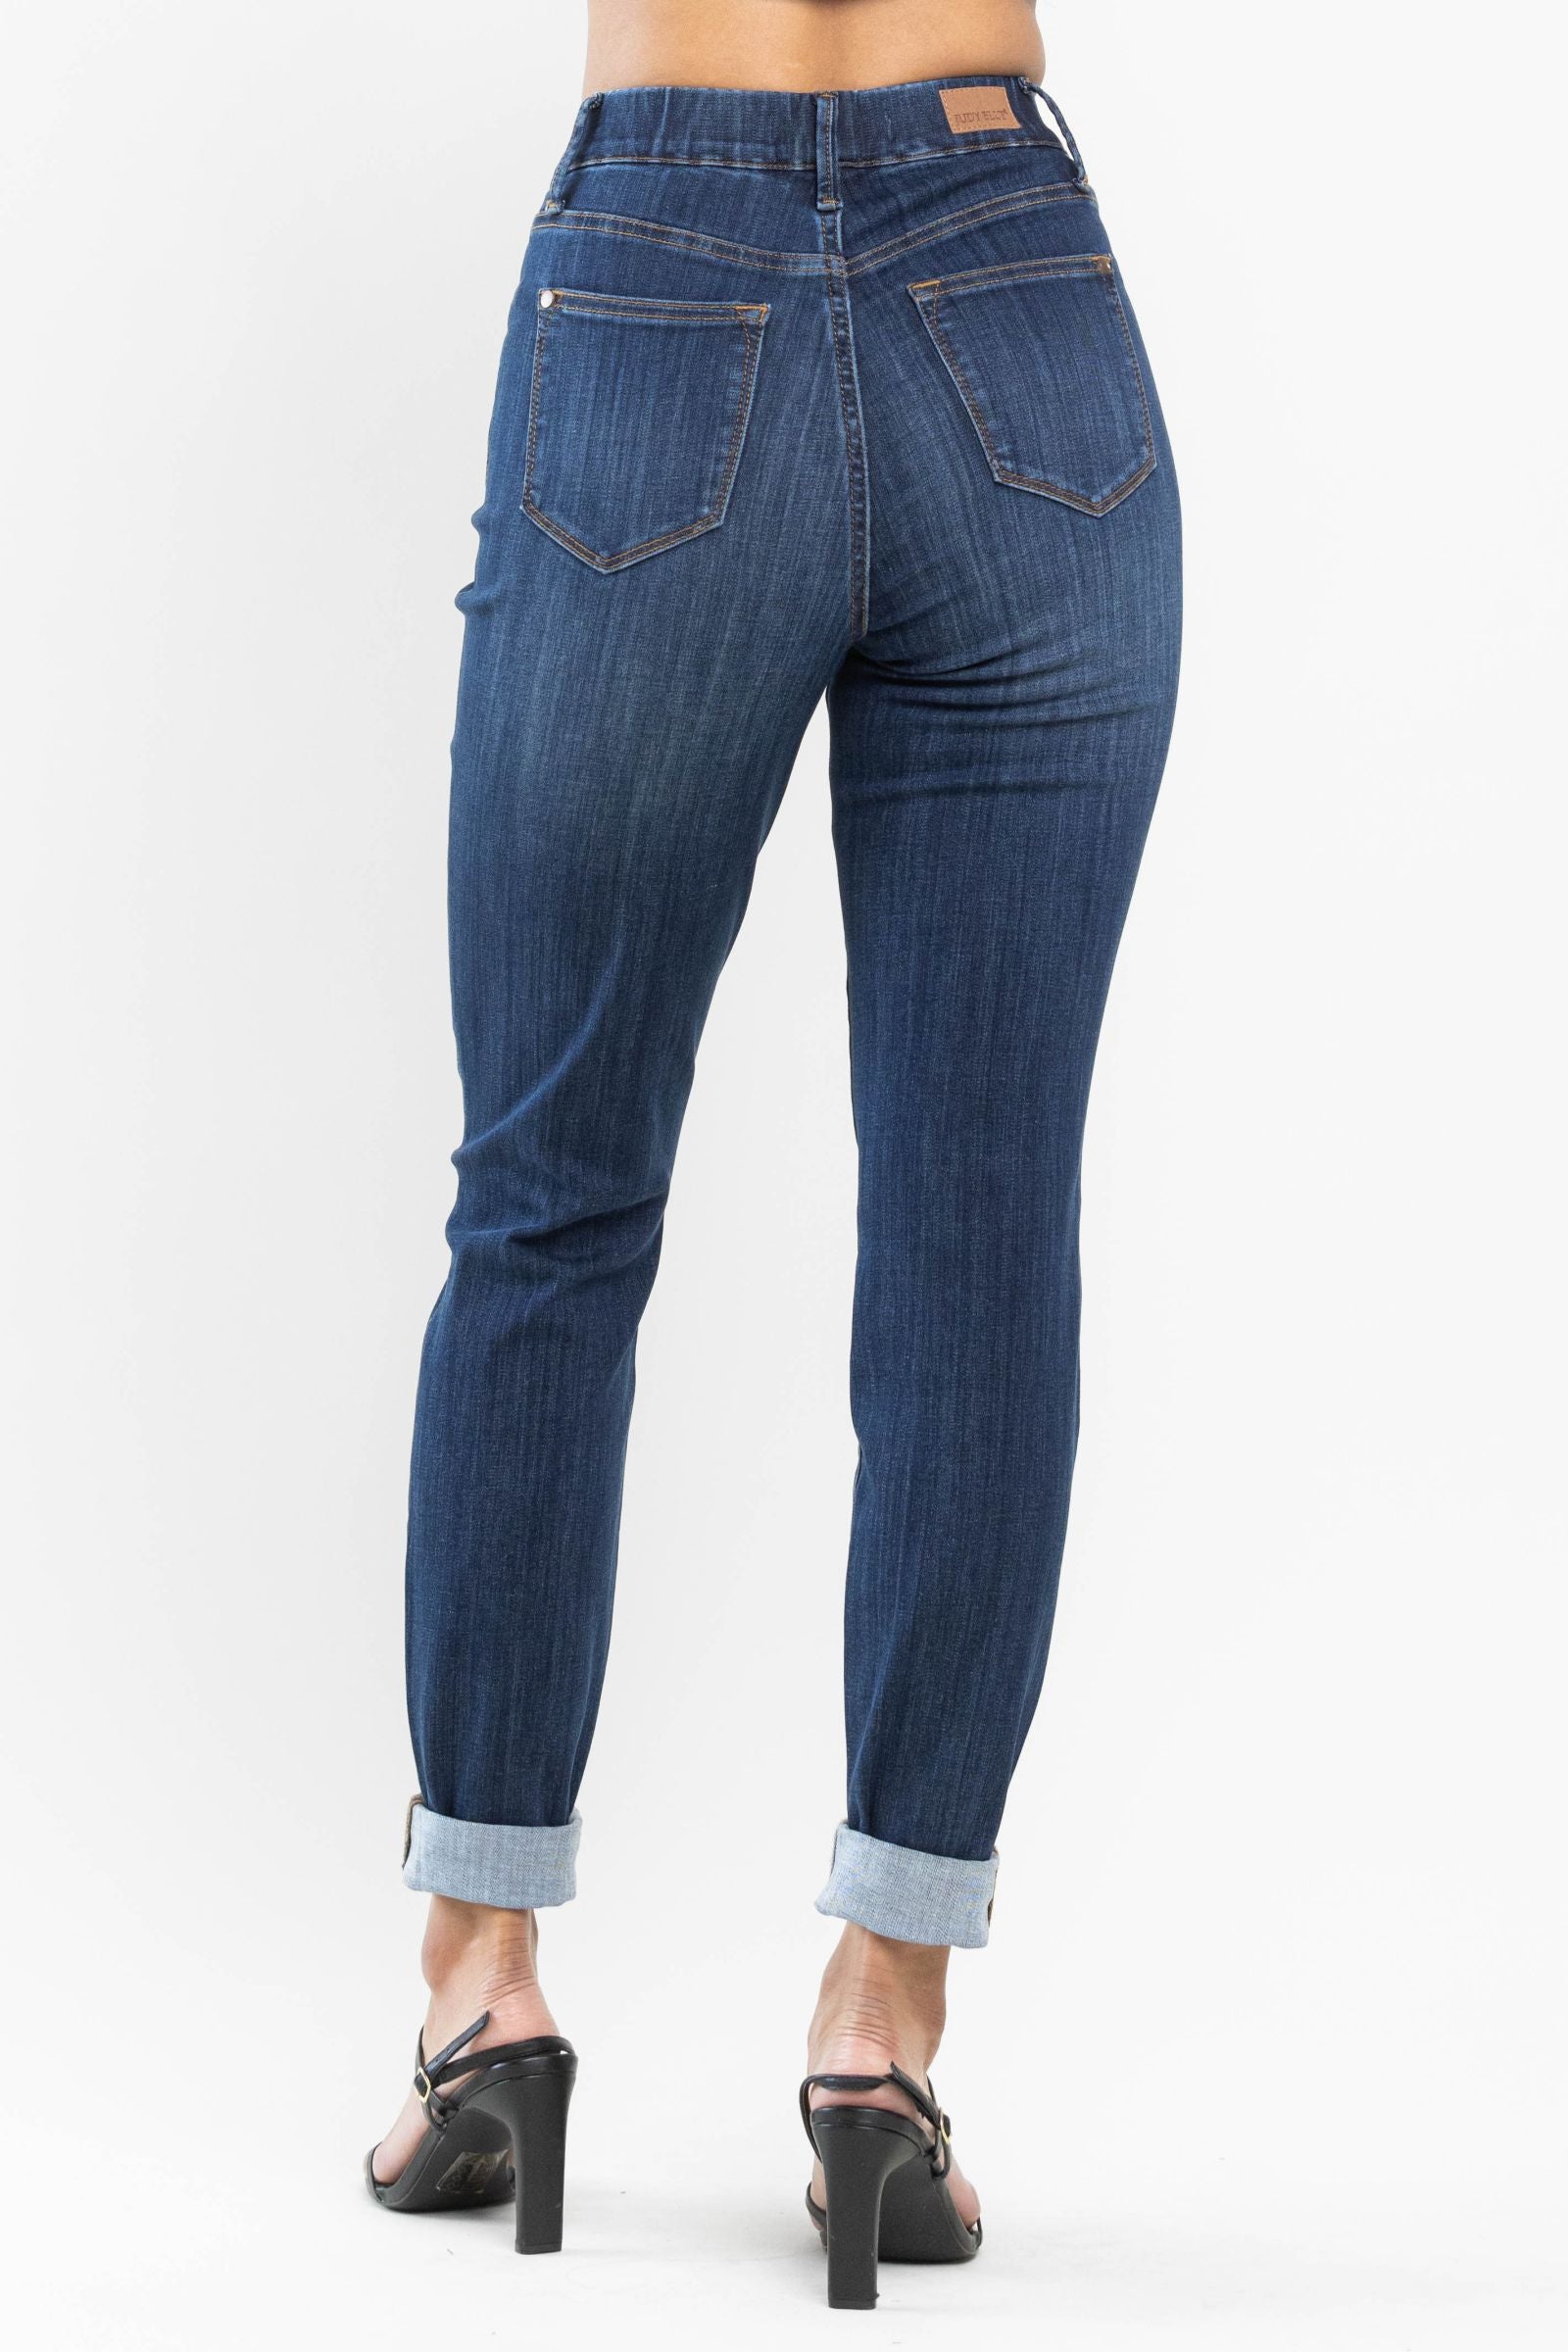 Pull On Denim By Judy Blue Jeans